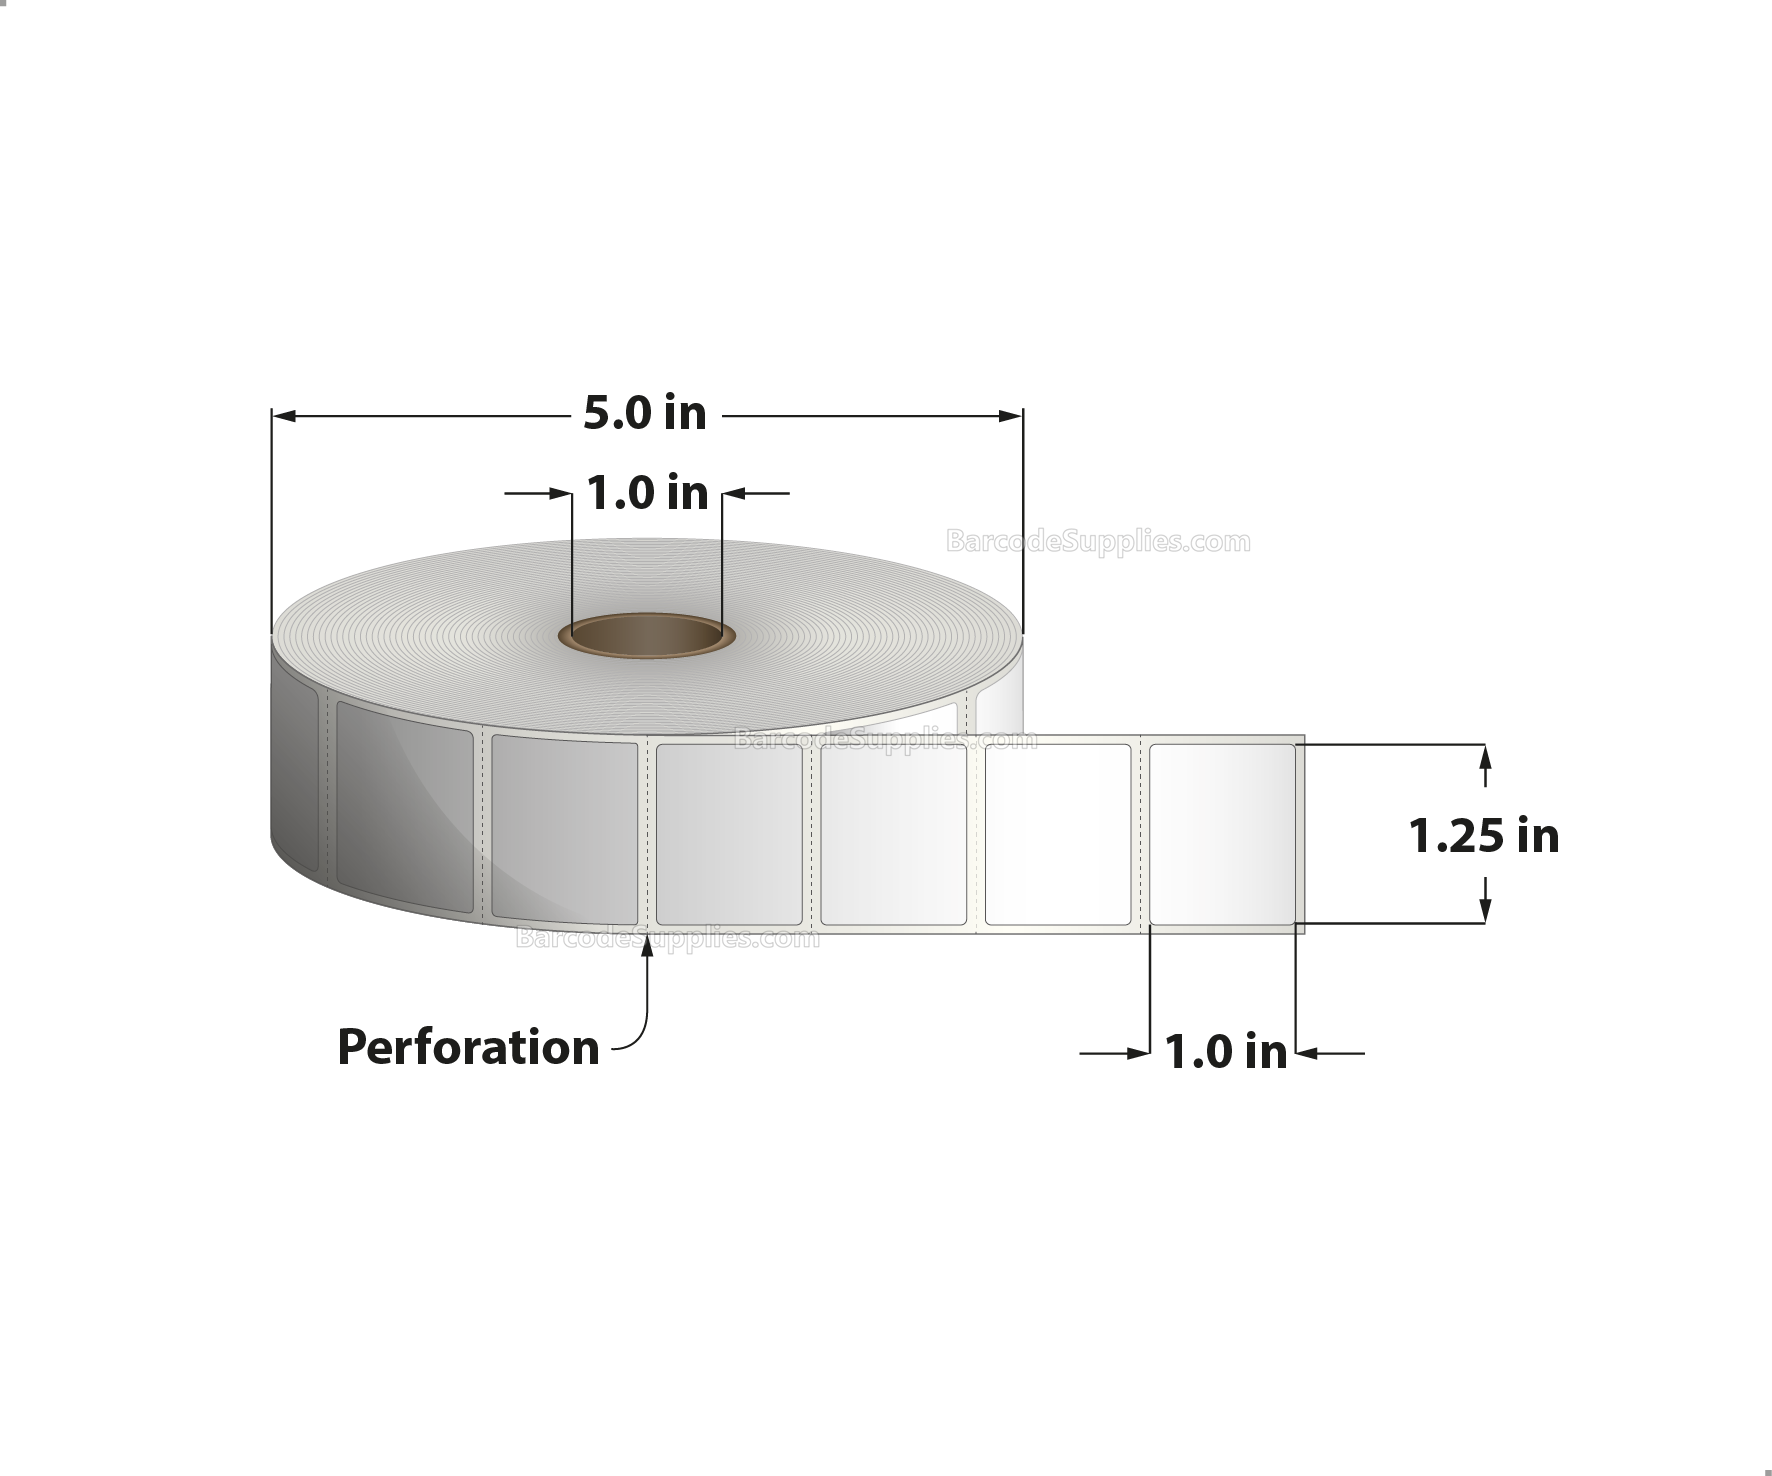 1.25 x 1 Thermal Transfer White Labels With Permanent Acrylic Adhesive - Perforated - 2300 Labels Per Roll - Carton Of 4 Rolls - 9200 Labels Total - MPN: TH1251-1PTTPOLY